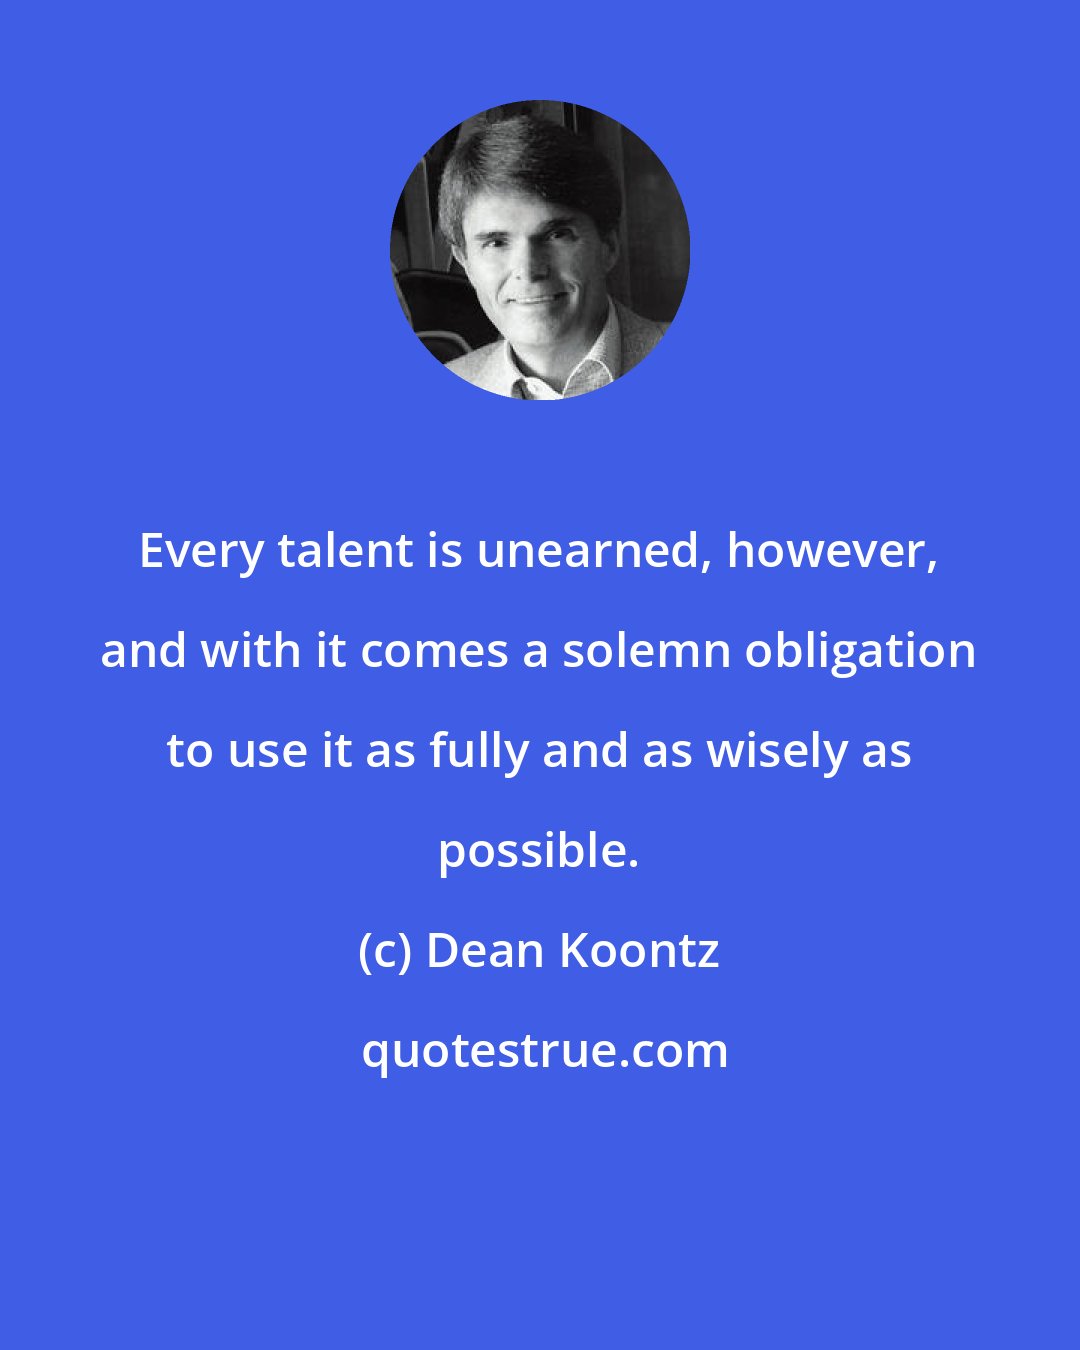 Dean Koontz: Every talent is unearned, however, and with it comes a solemn obligation to use it as fully and as wisely as possible.